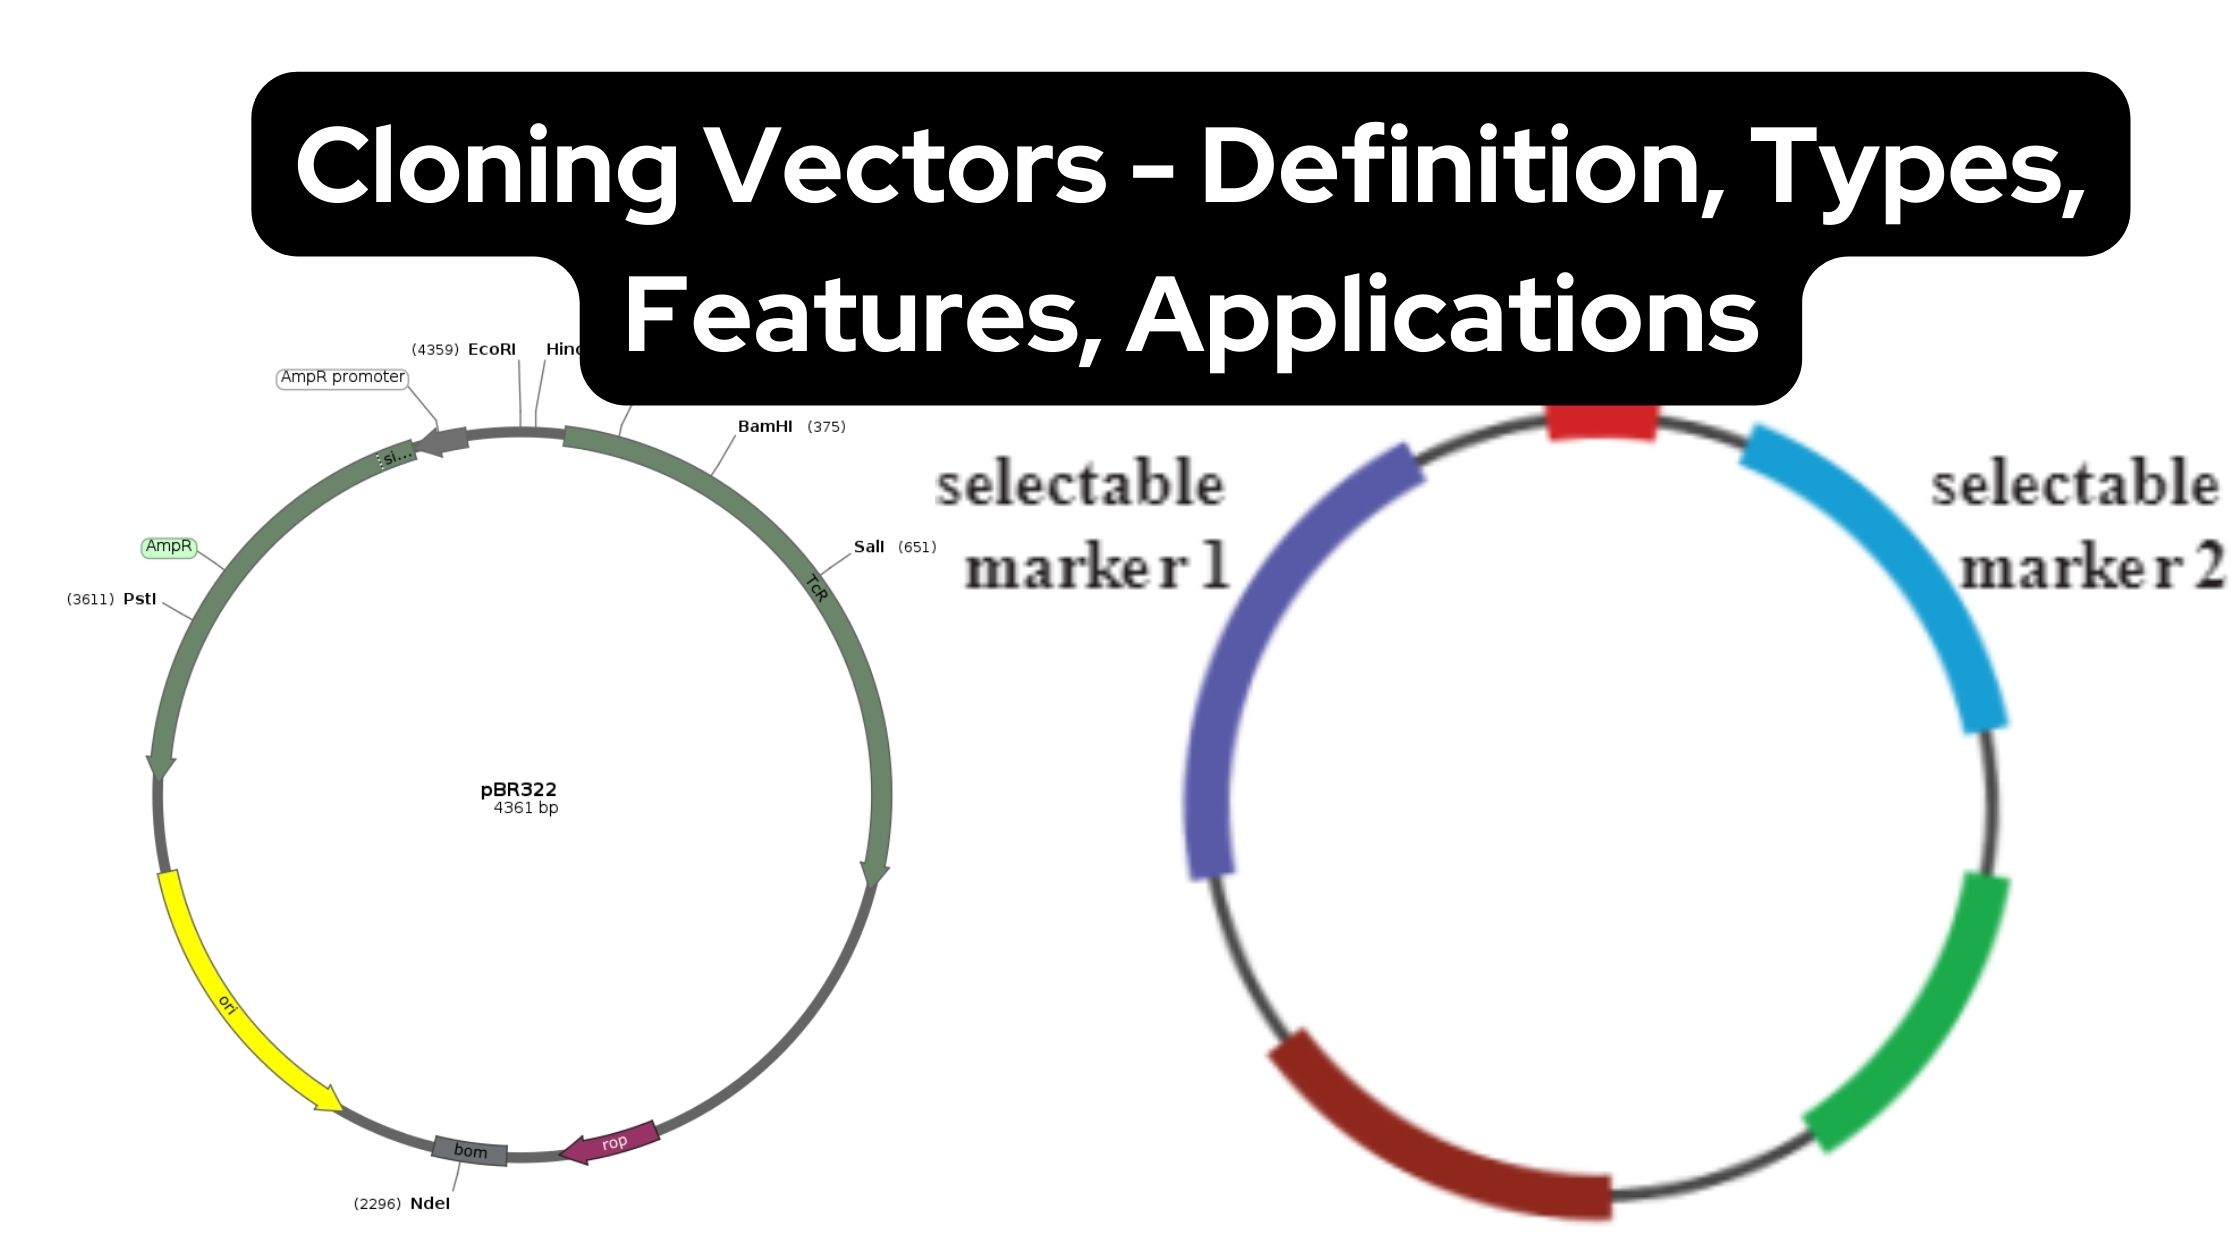 Cloning Vectors - Definition, Types, Features, Applications